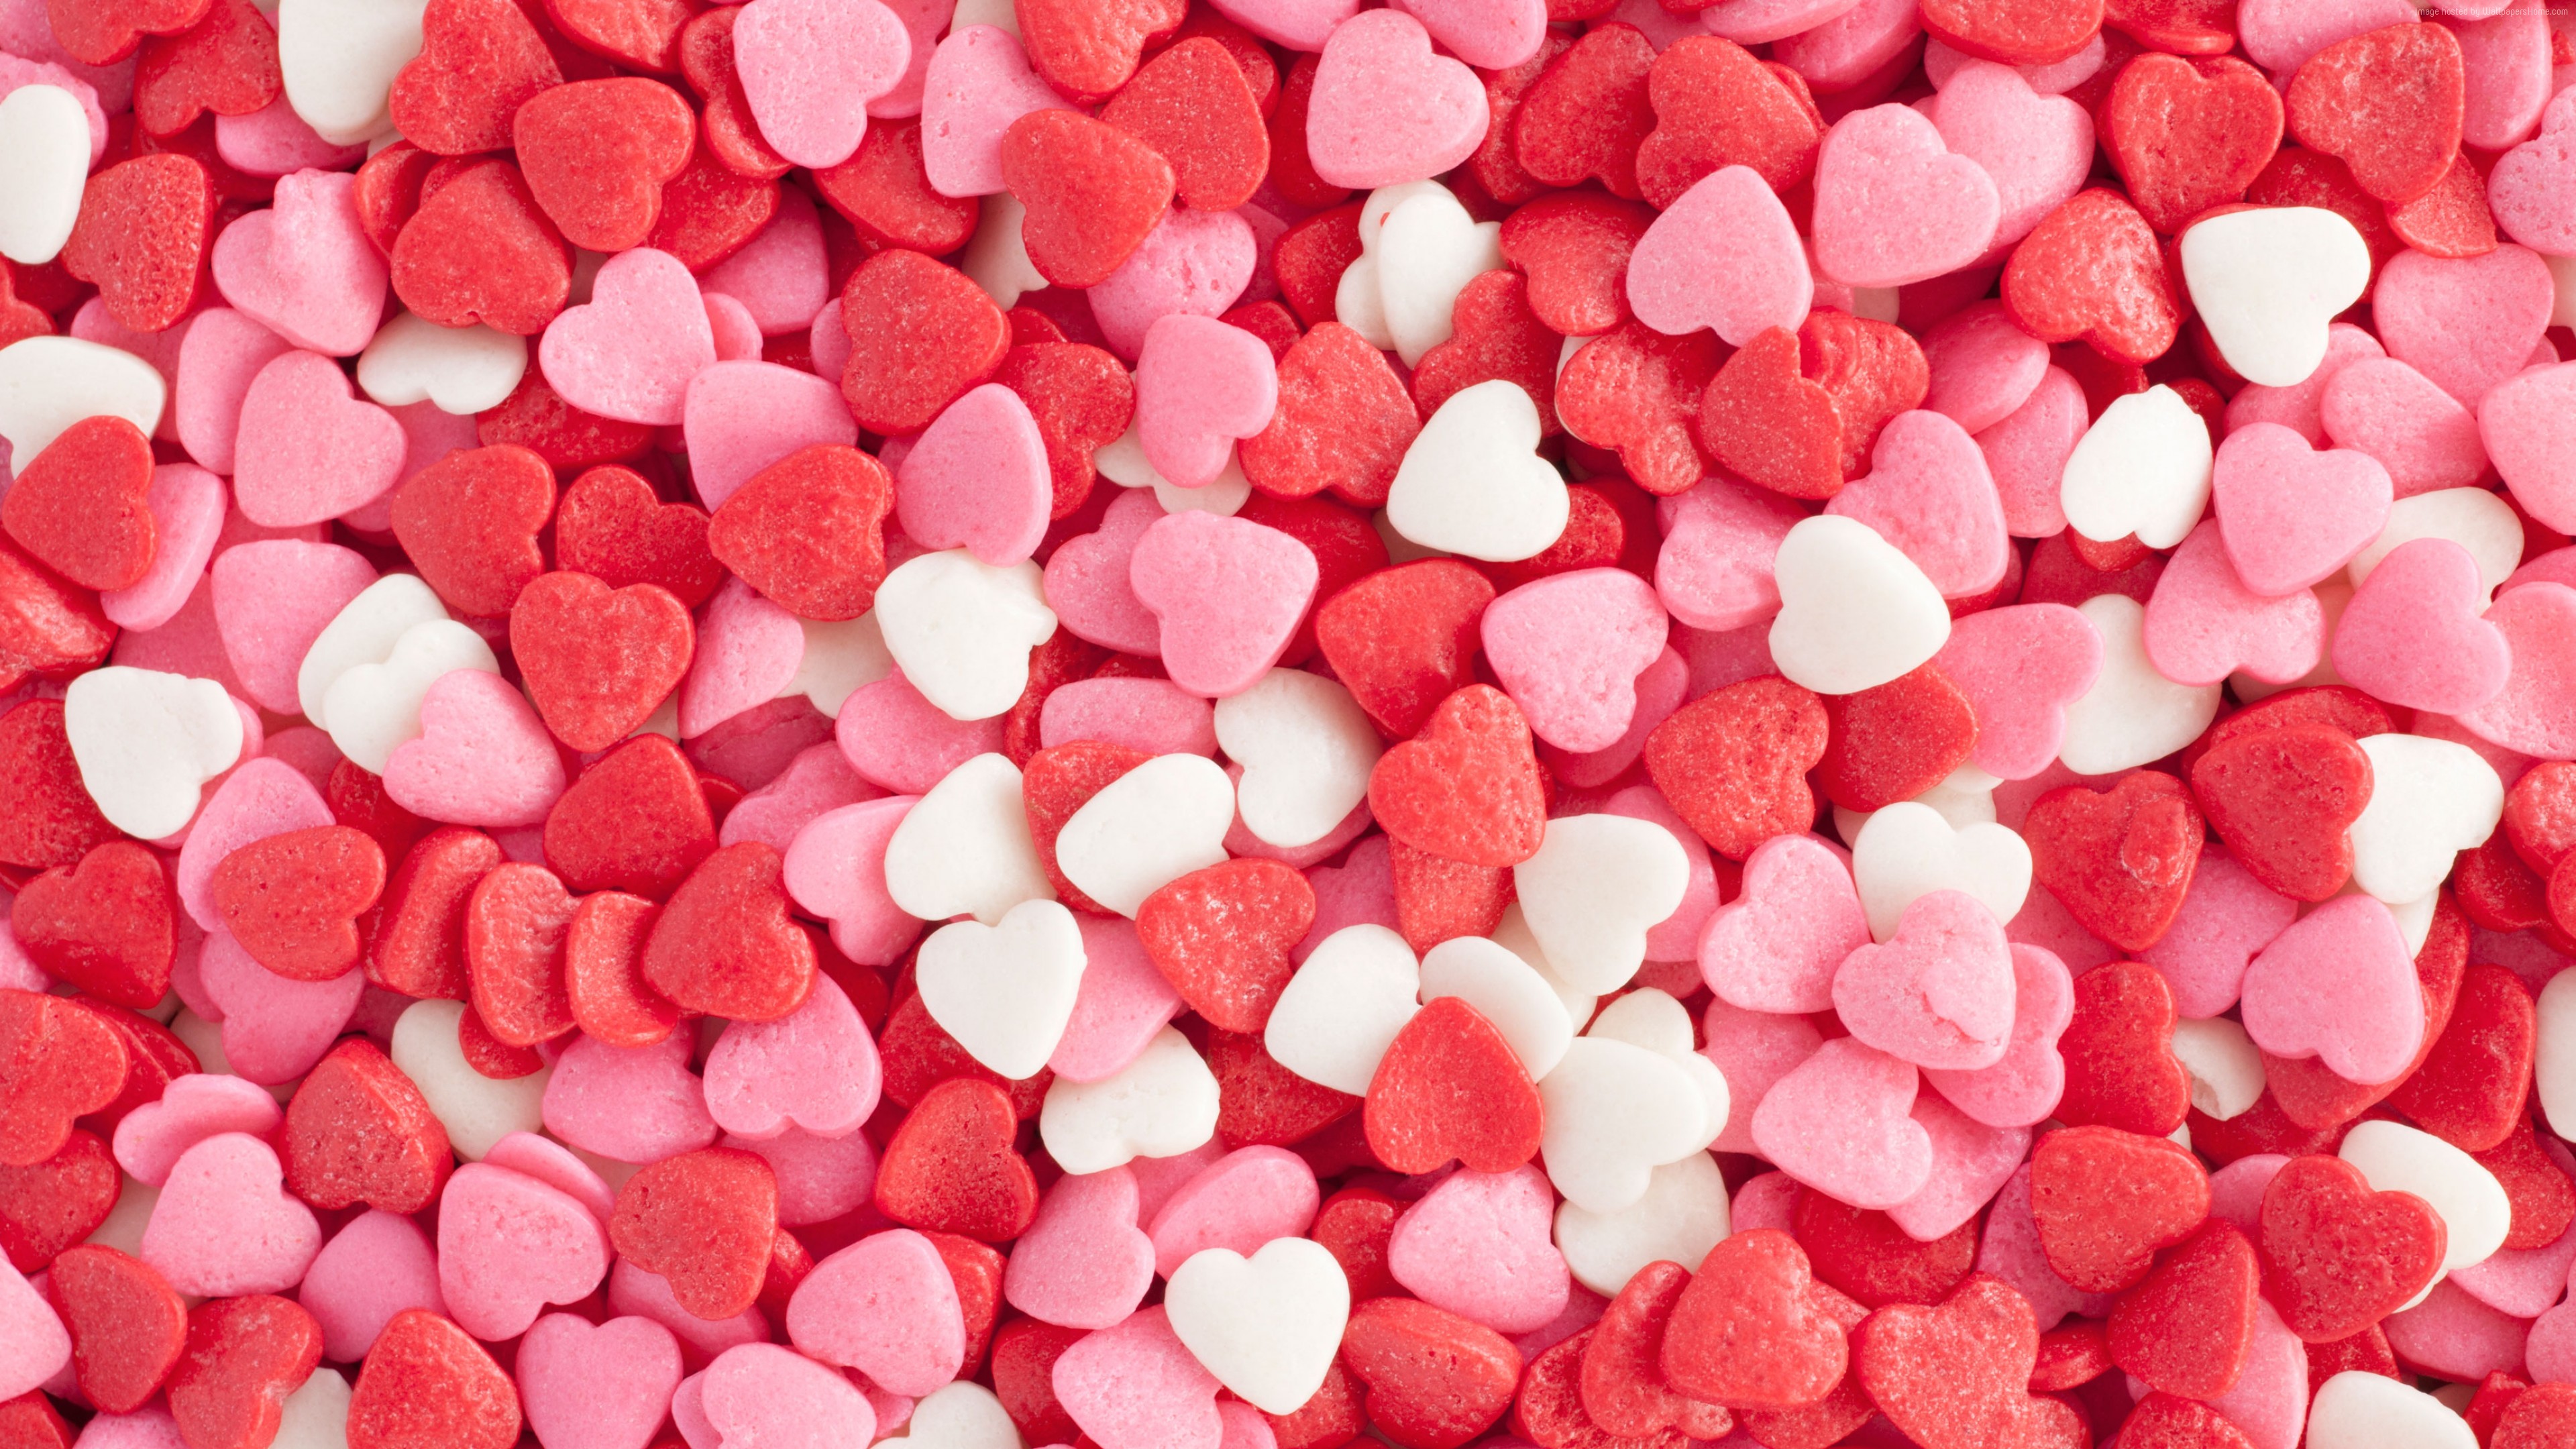 Stock Images Love Image, Heart, 4k, Stock Images - Sprinkle Heart Shaped - HD Wallpaper 